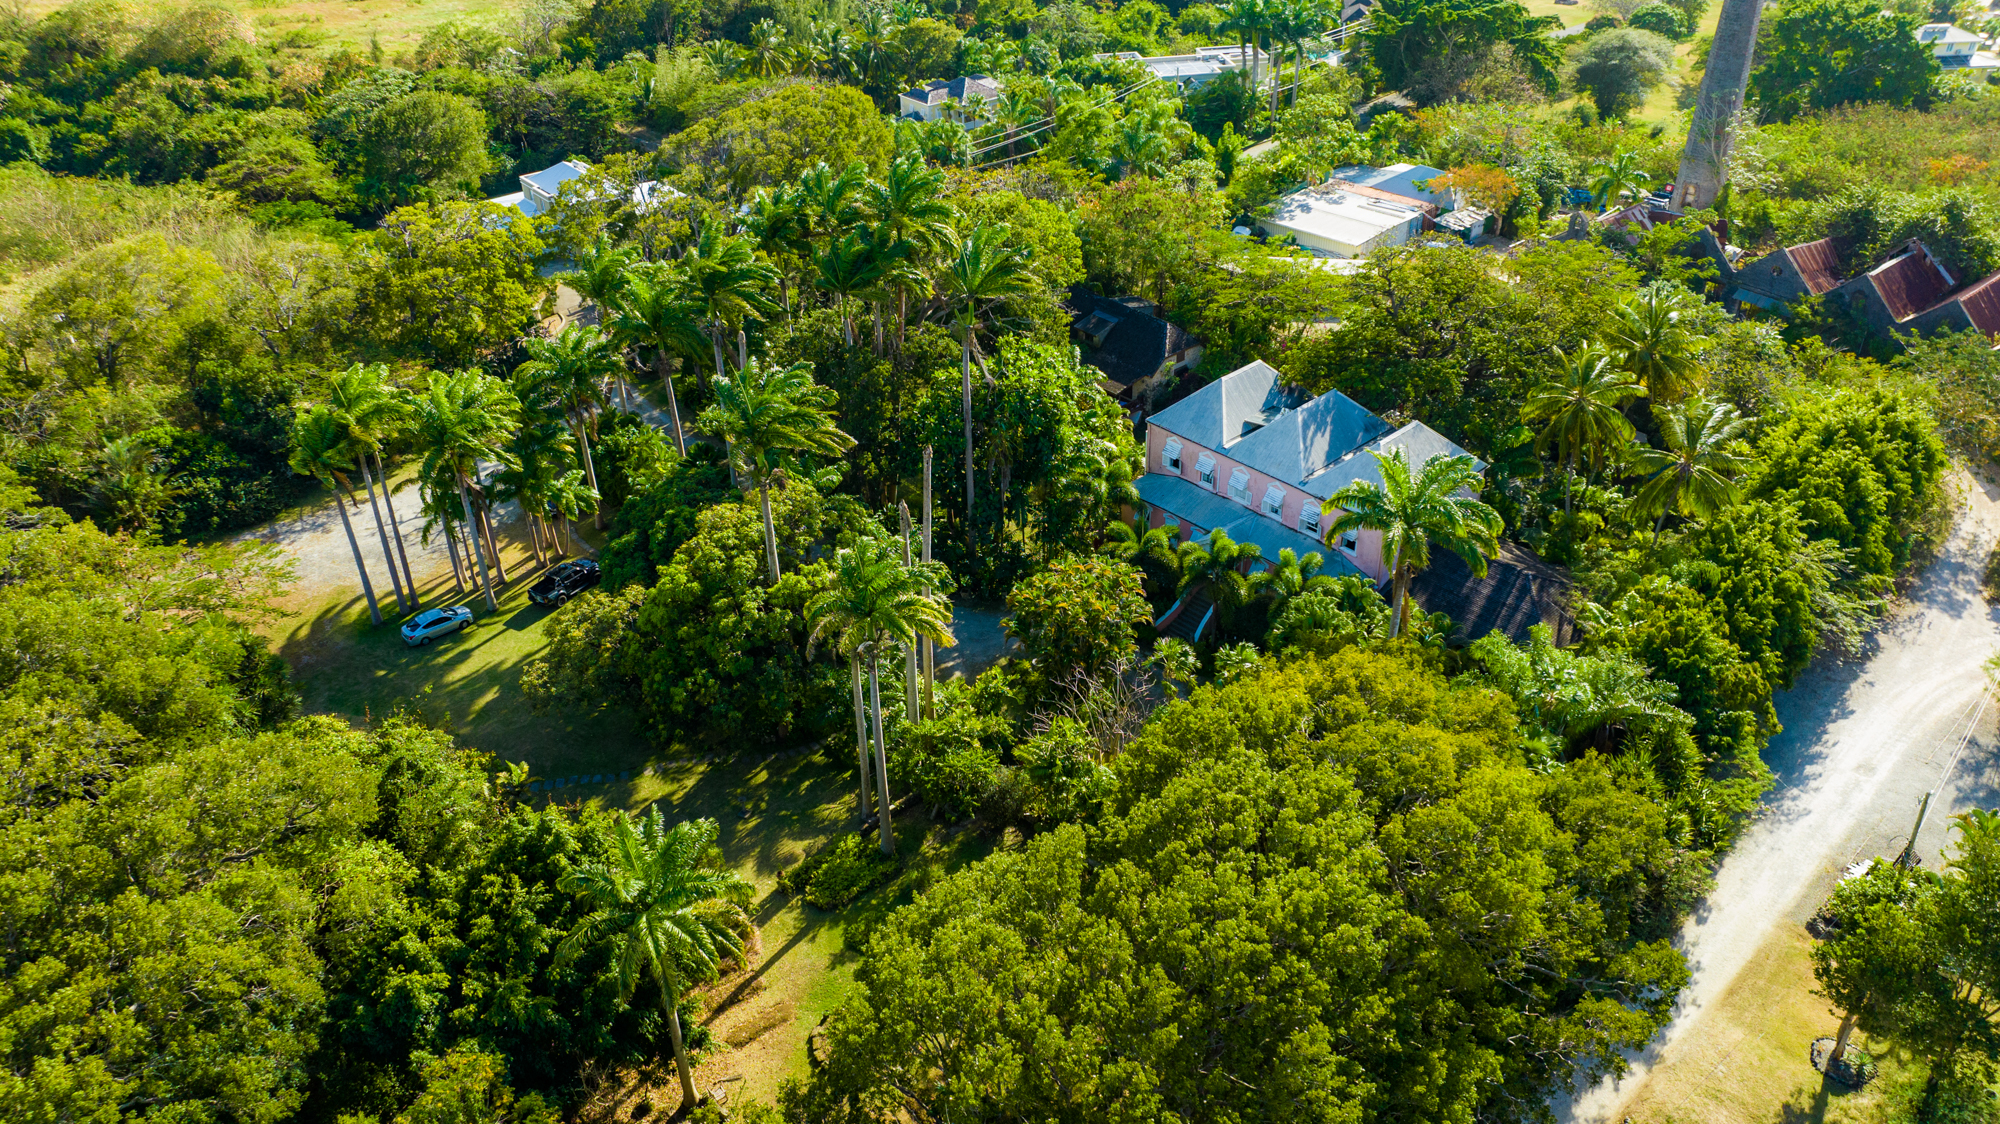 Lancaster Great House aerial views of the estate surrounded by lush tropical gardens